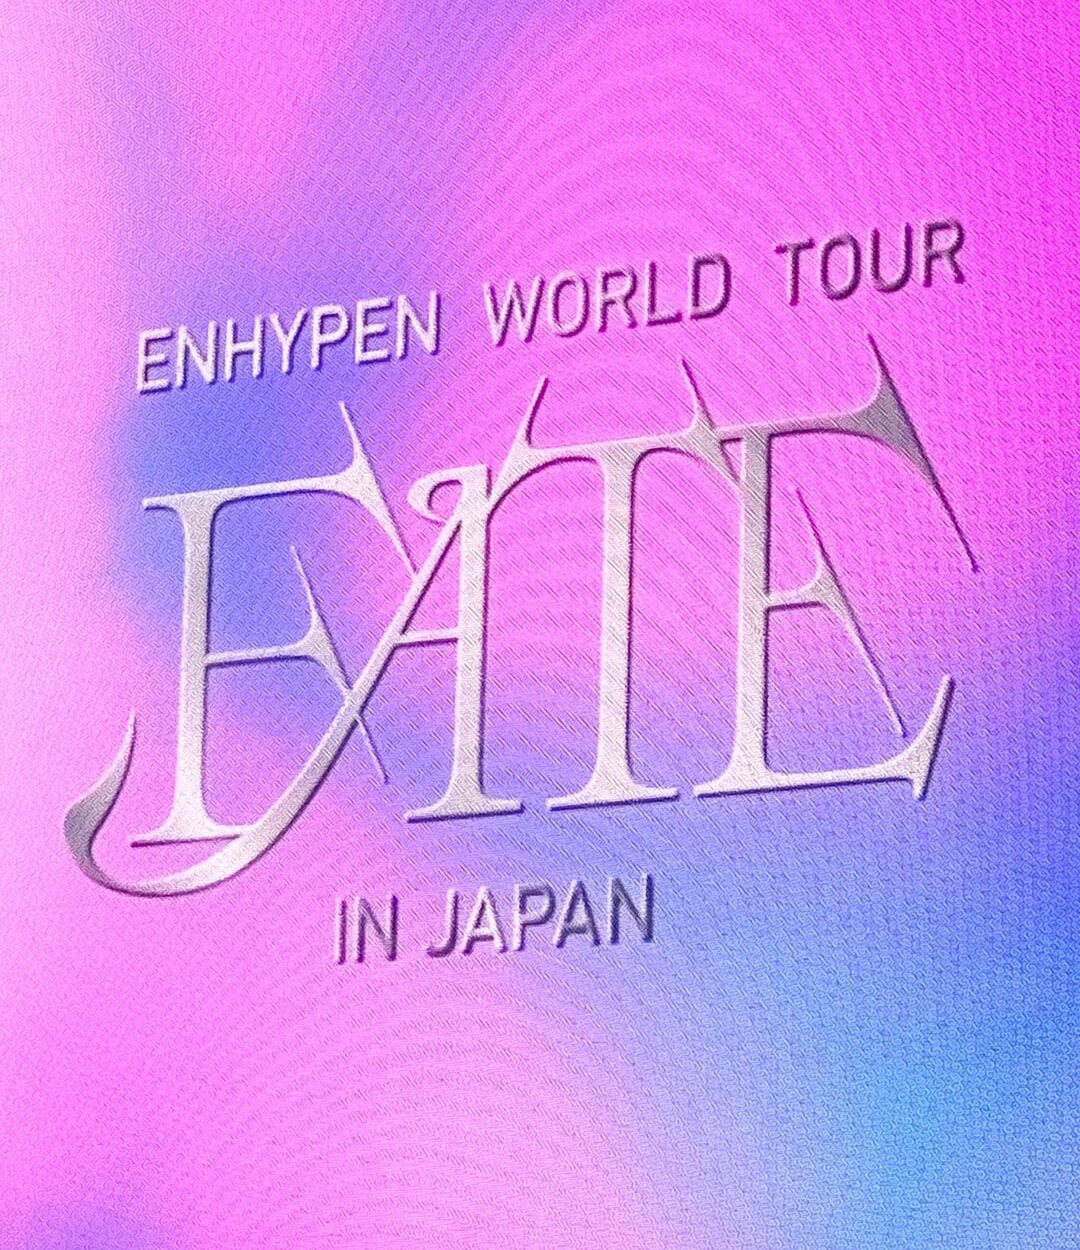 230902 Twitter: ENHYPEN OFFICIAL ‘KYOCERA DOME, D-DAY 🇯🇵’